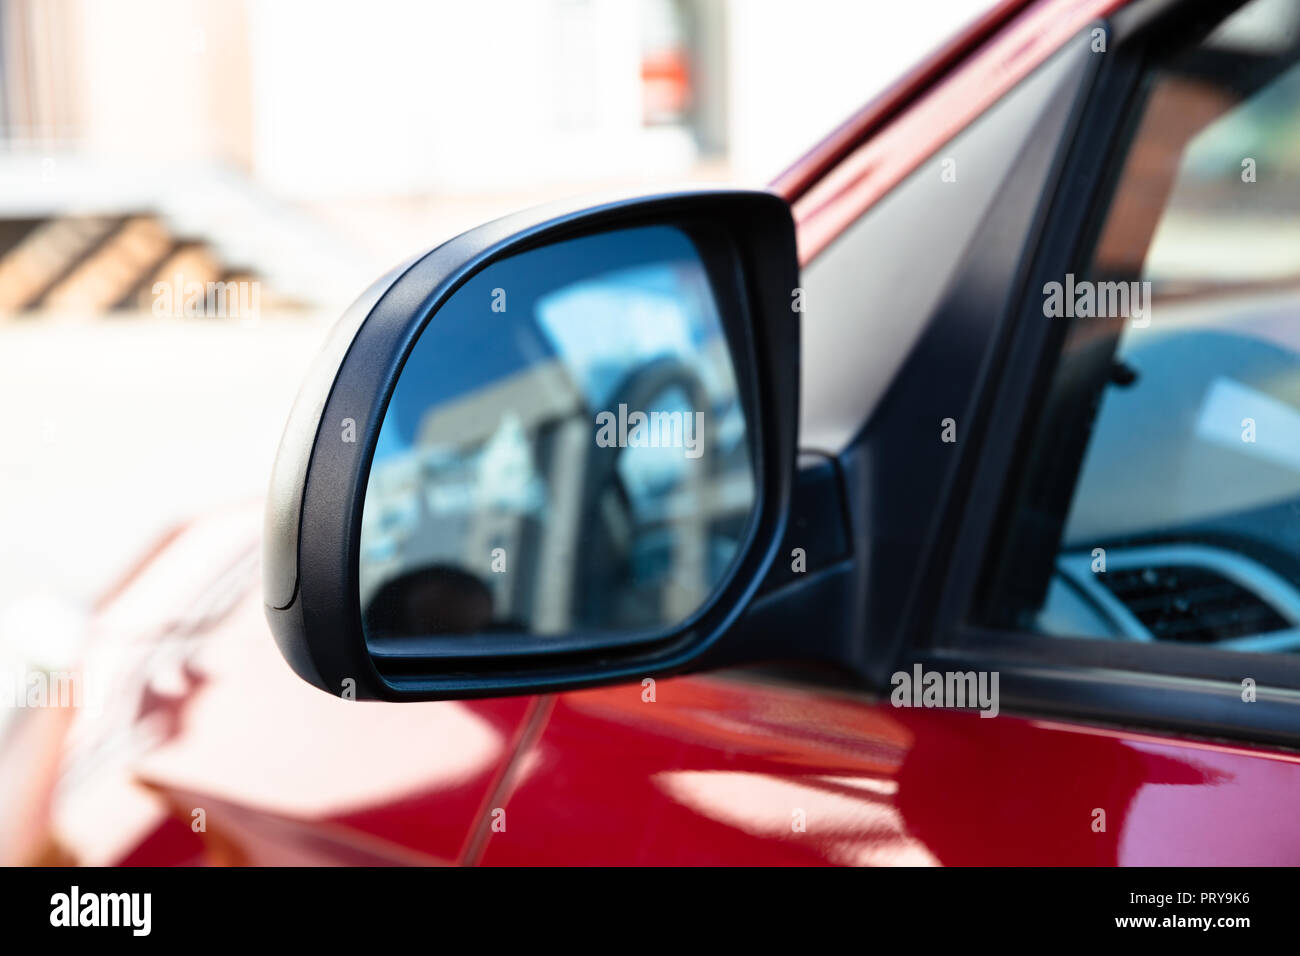 Rear View Mirror Of A Car Driving On Street Stock Photo